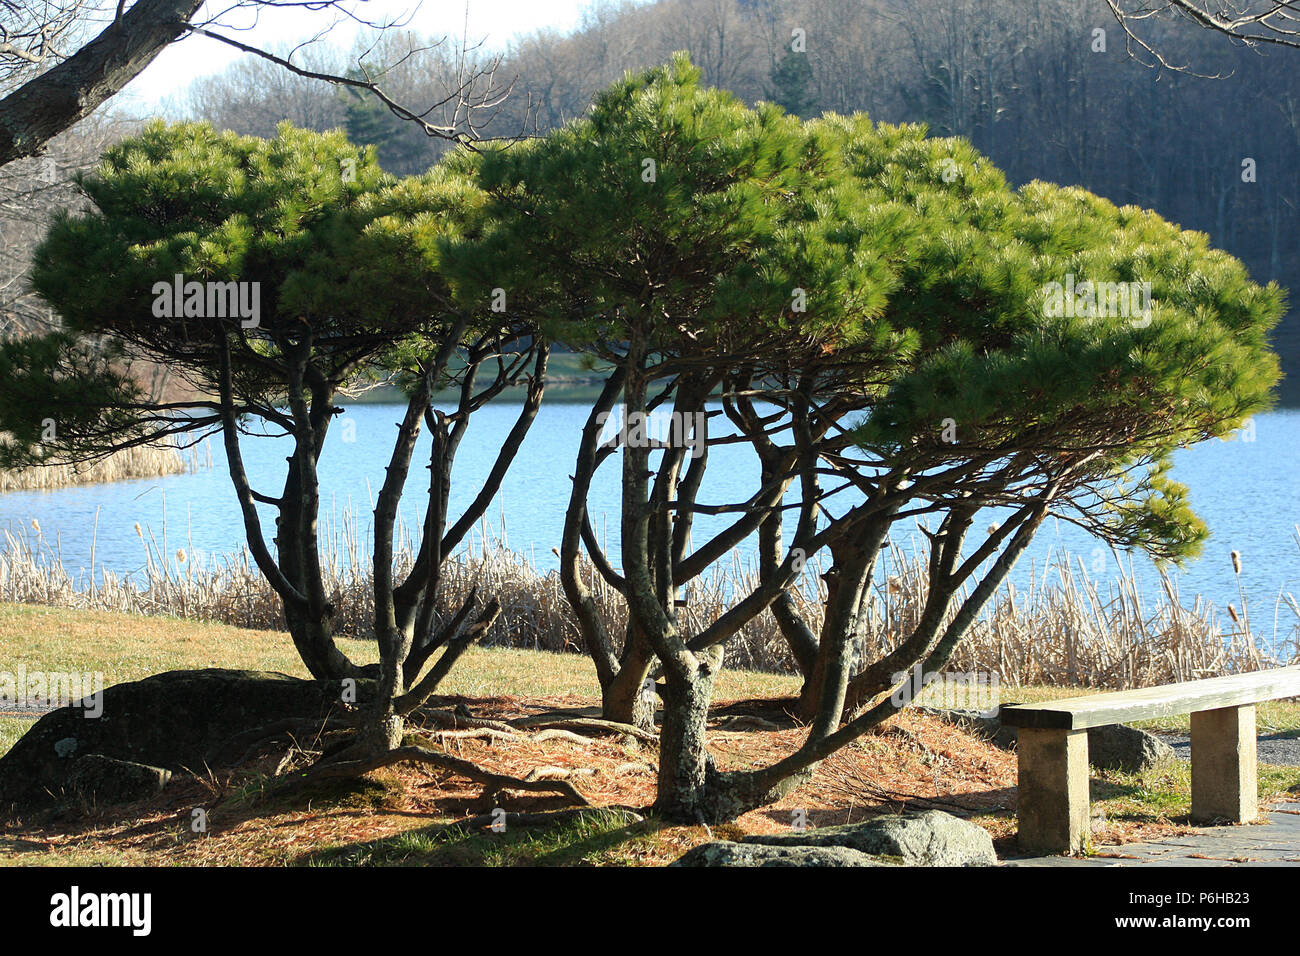 Evergreen trees used as ornamental plants in public space Stock Photo